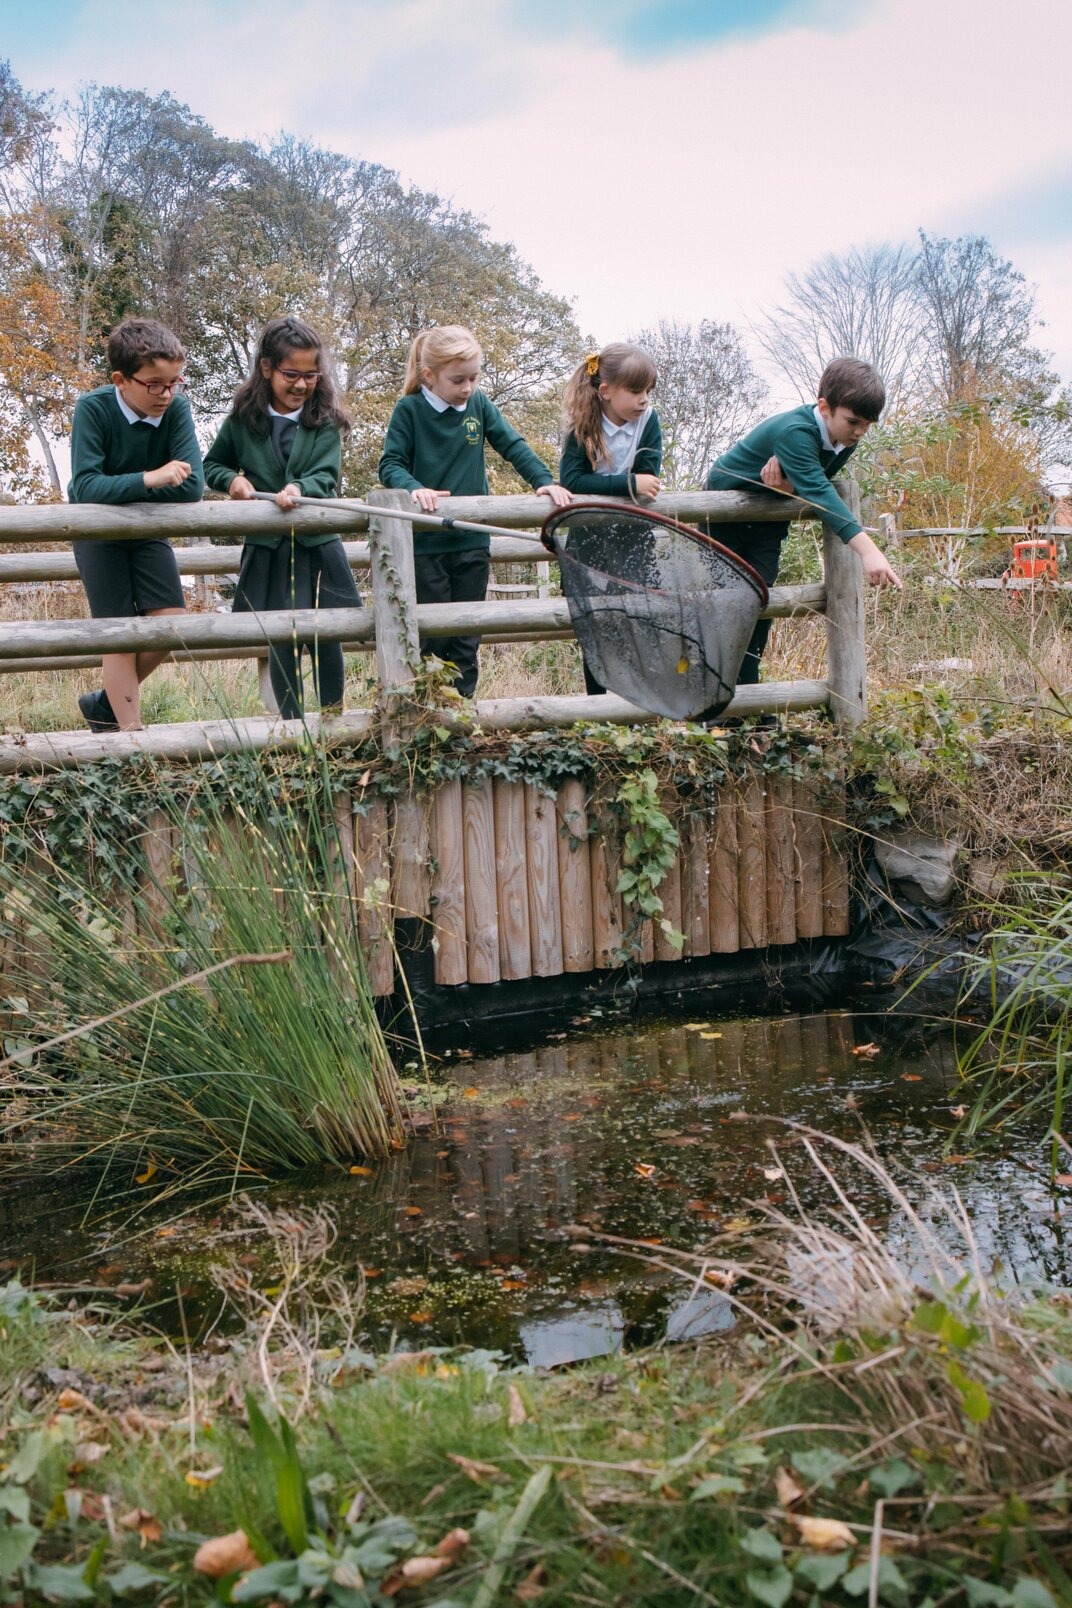 Children on a bridge over a pond with a net